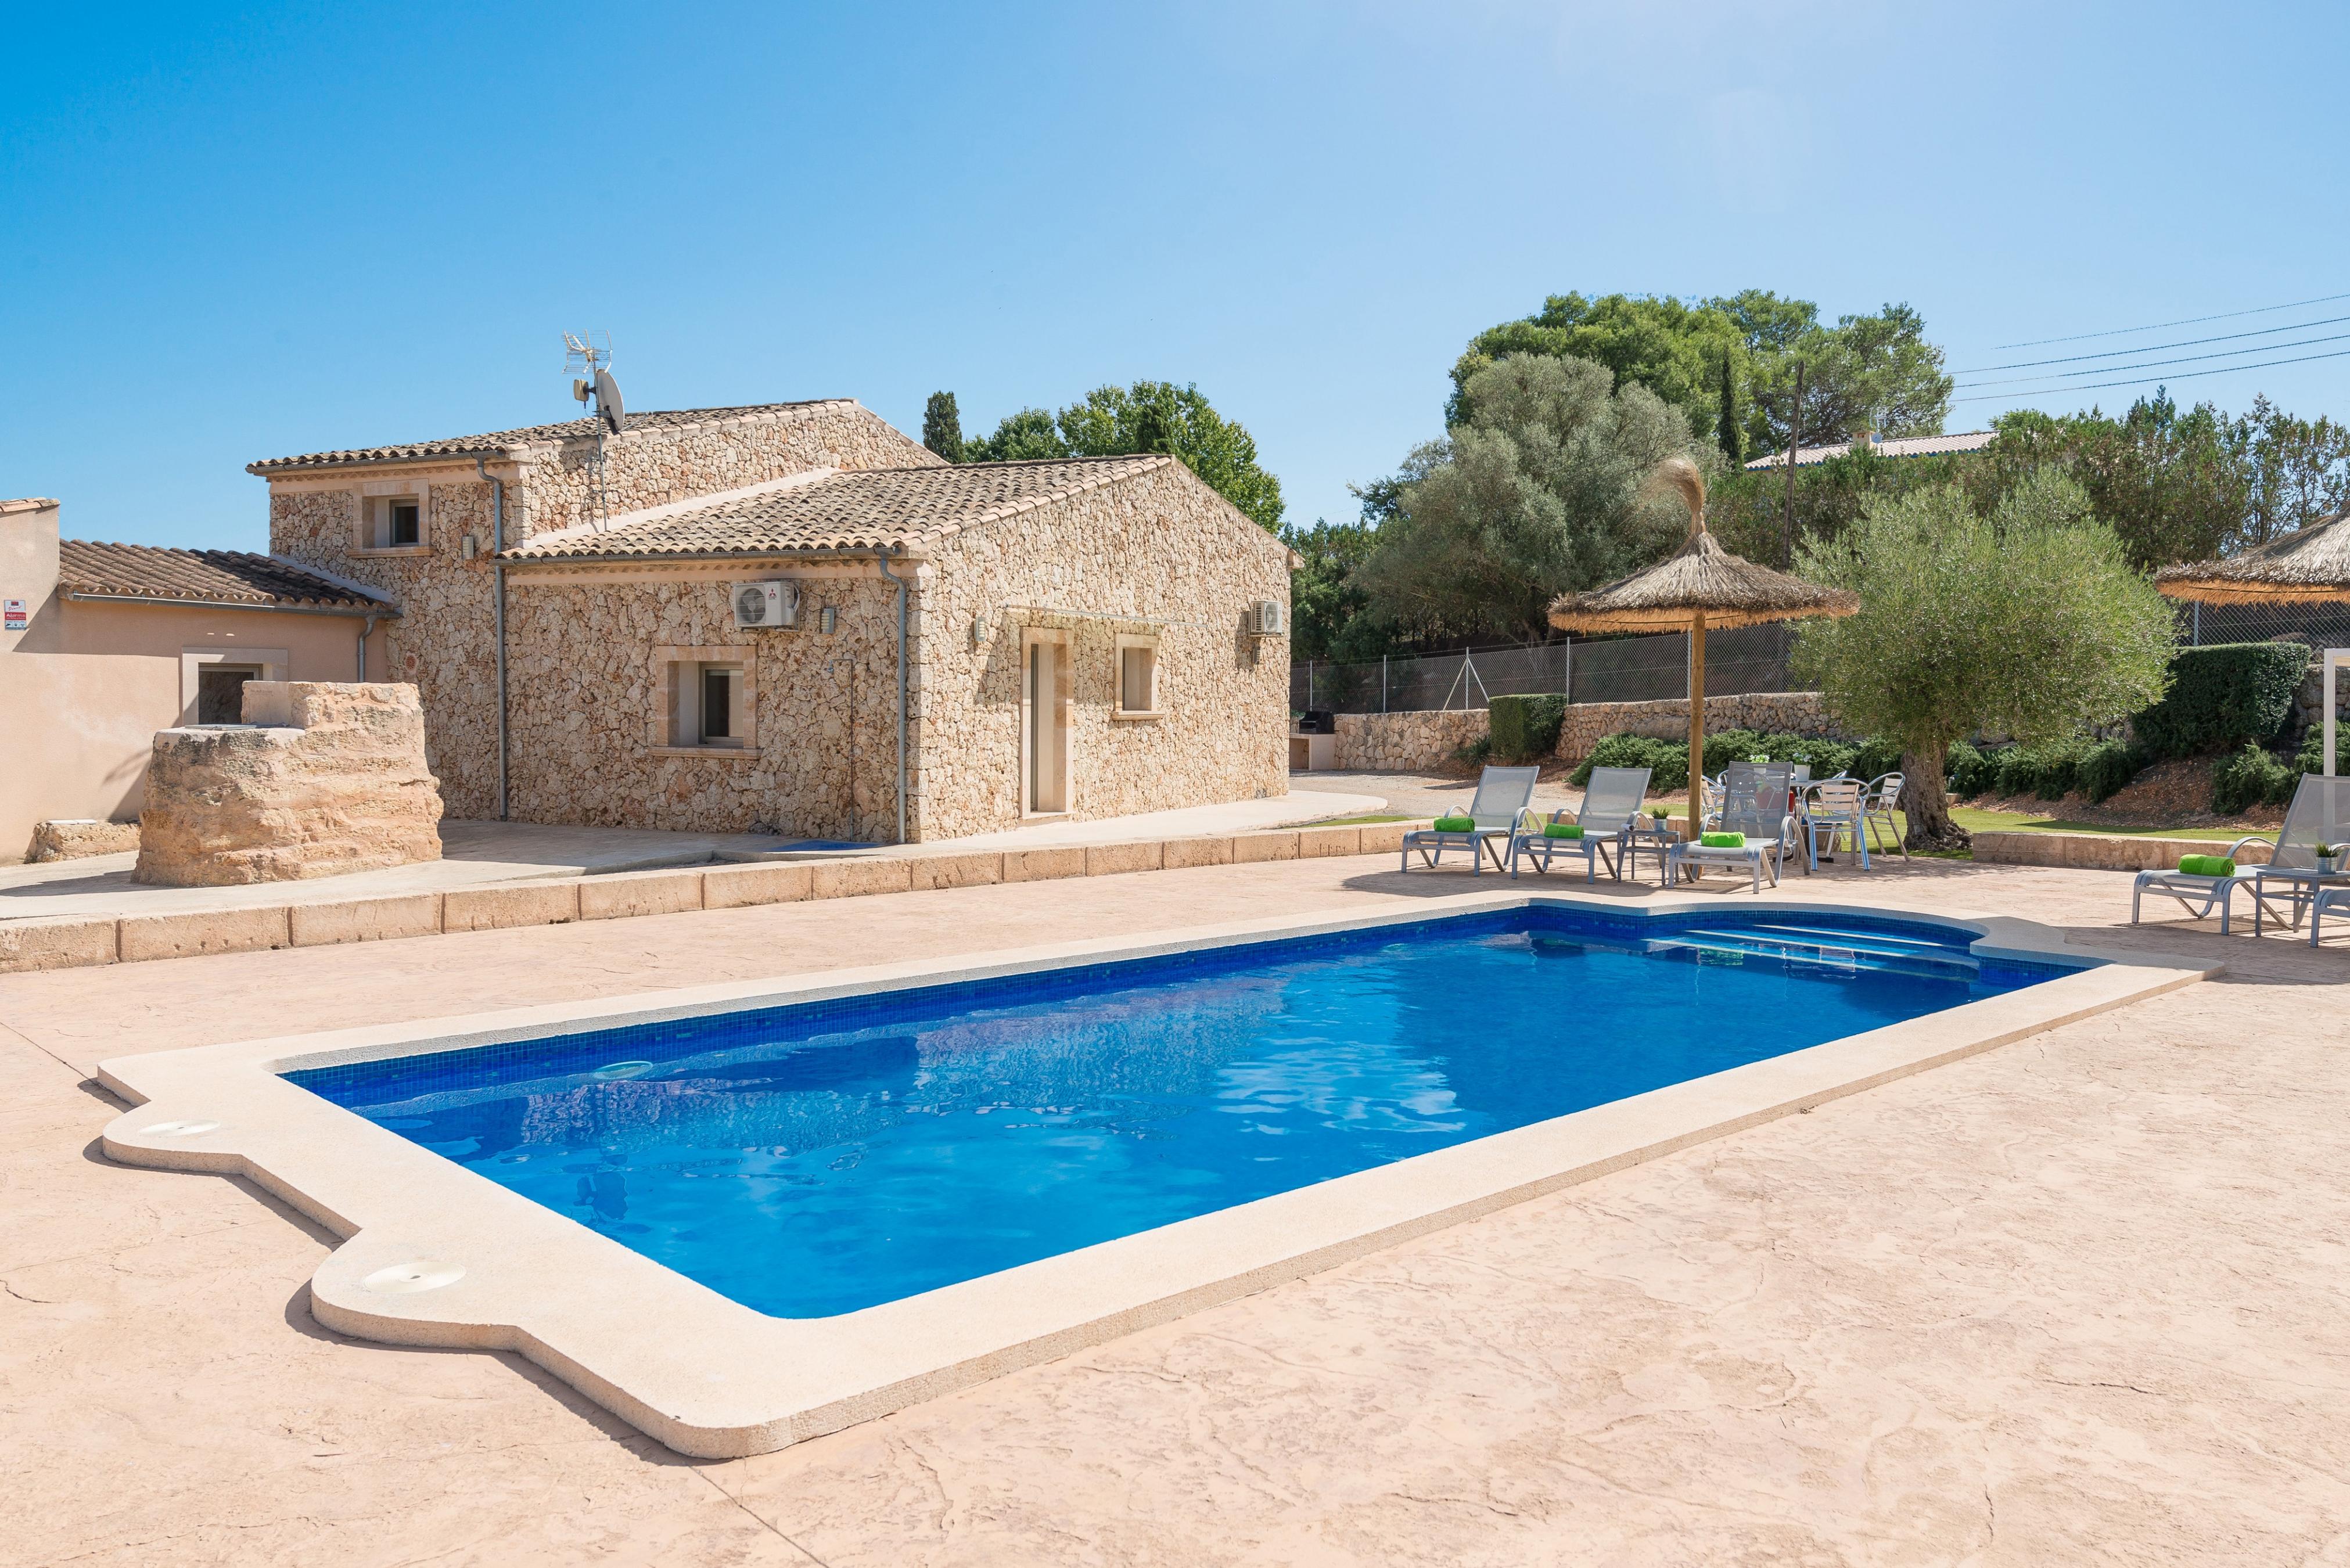 Property Image 1 - CAN BRIVO - Modern country house with private pool in a rural surrounding. Free WiFi